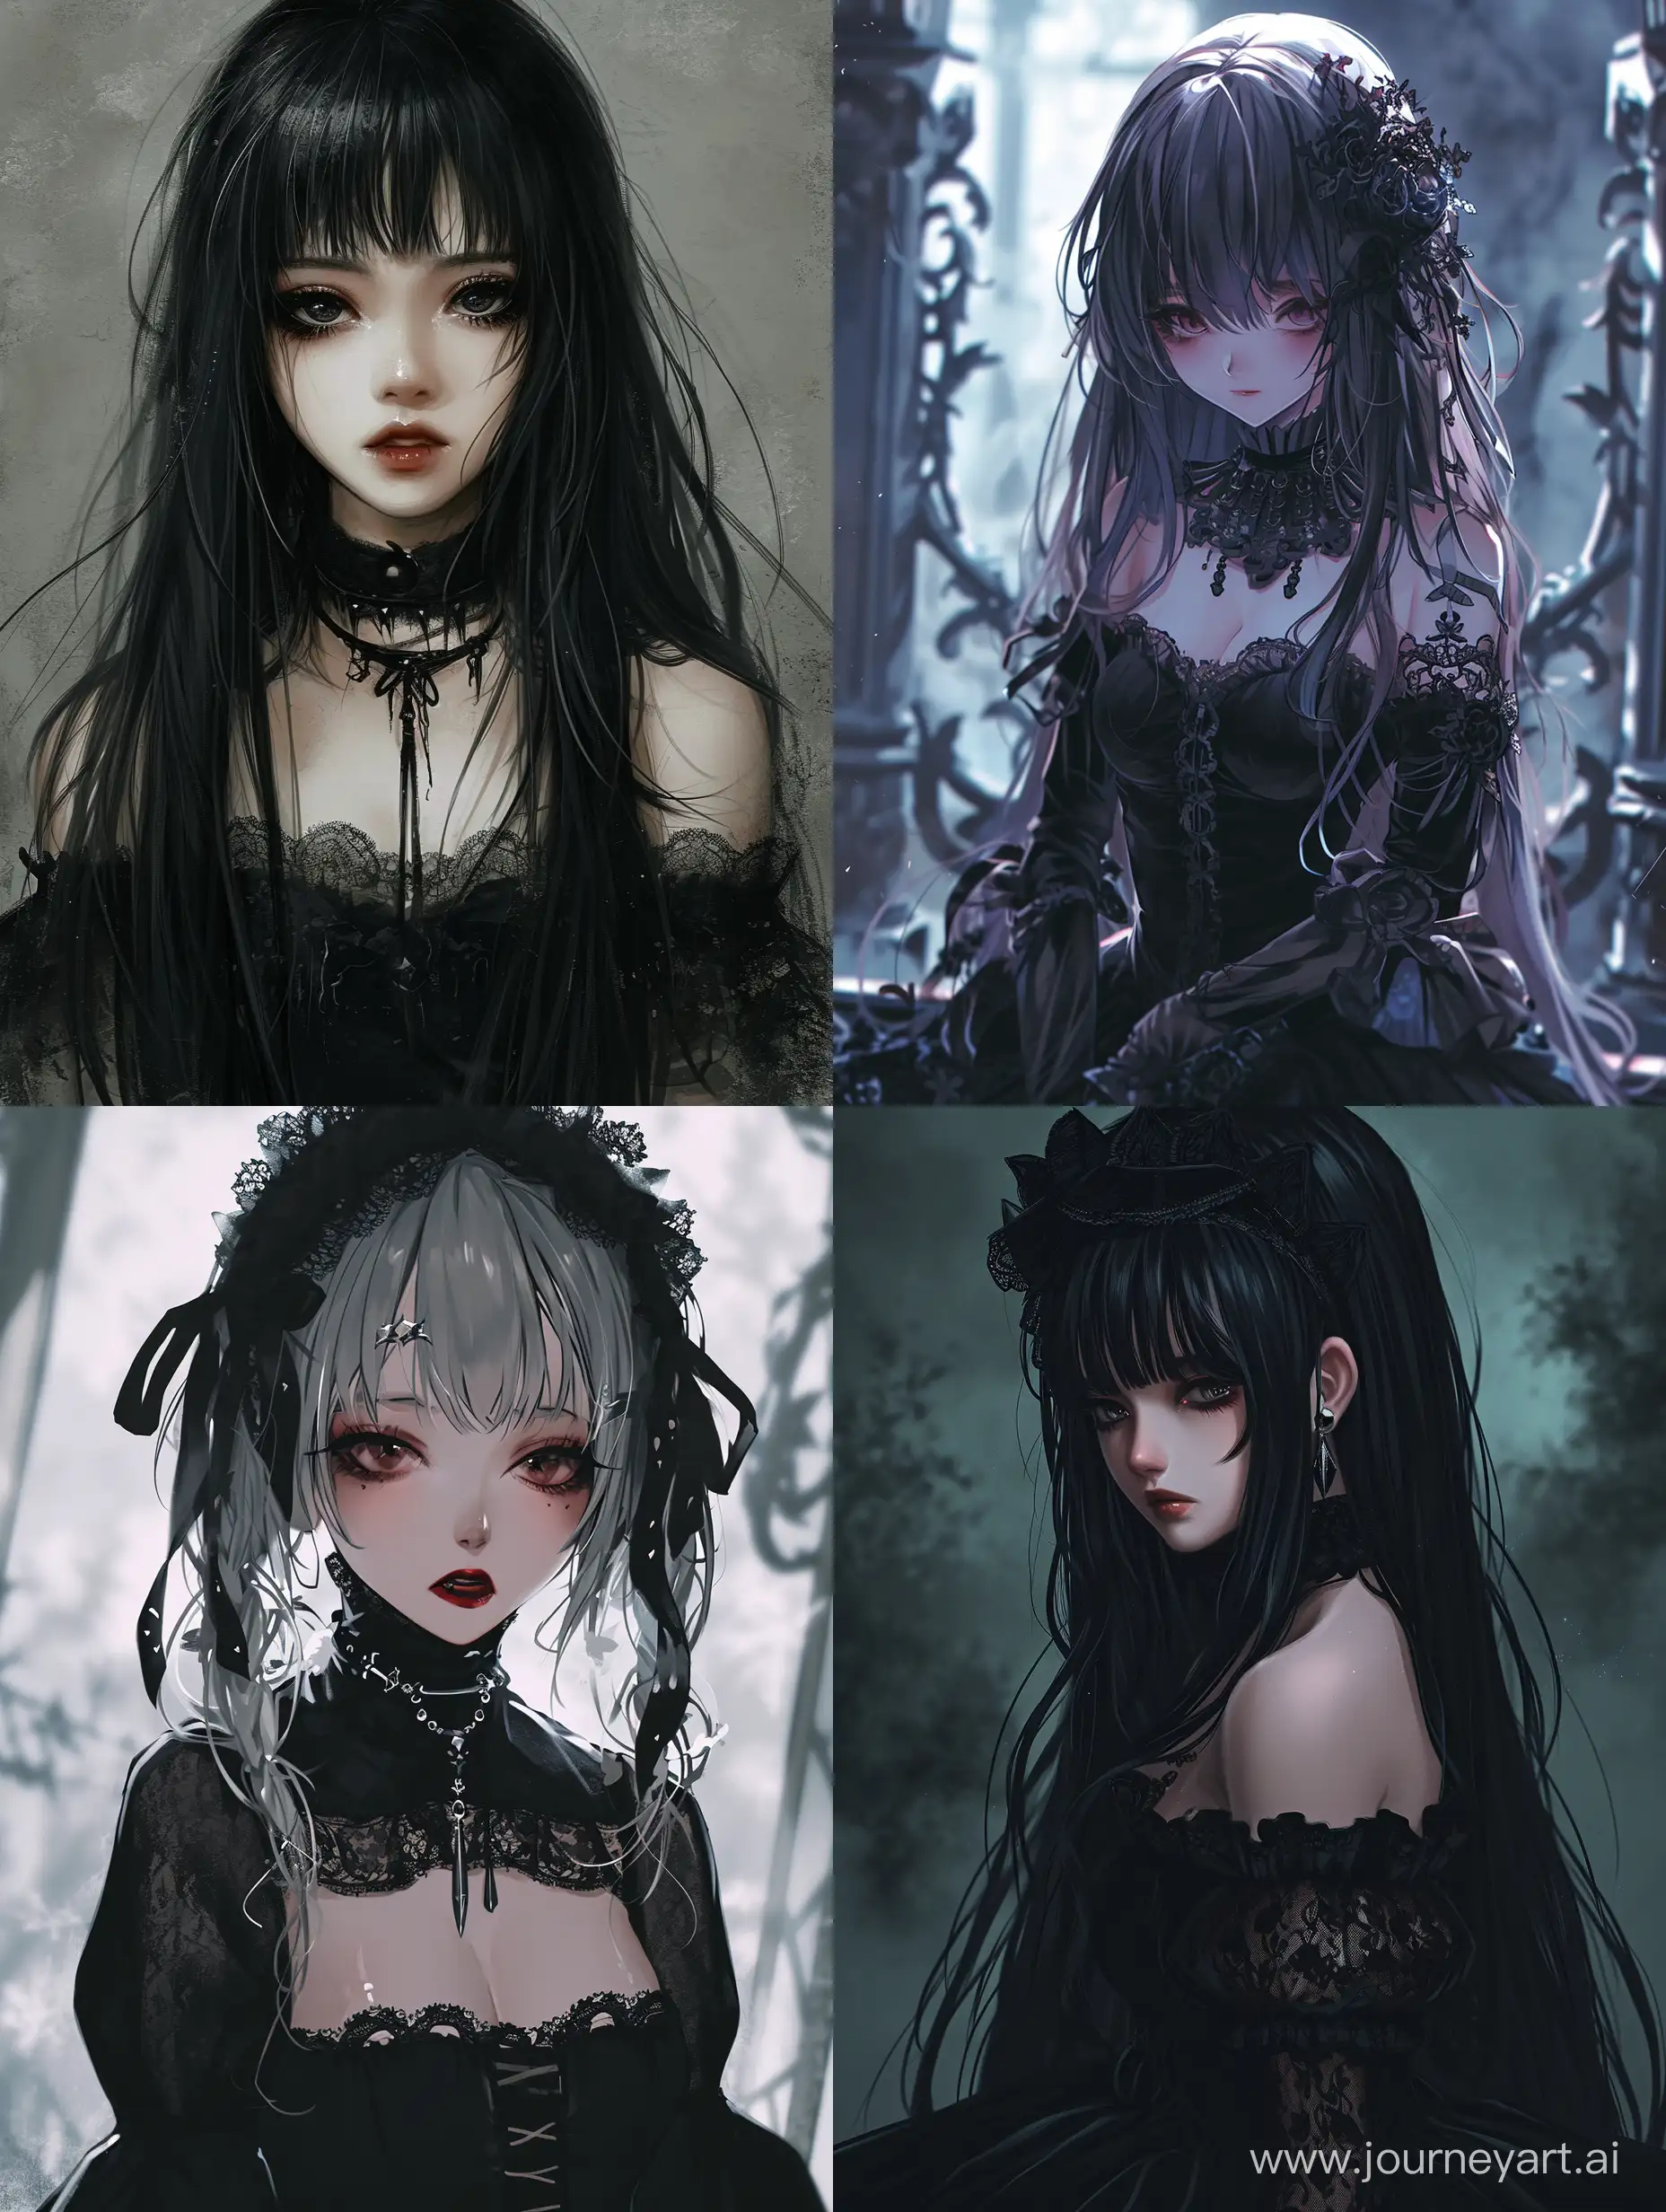 Gothic-Anime-Girl-Art-with-6-Variations-in-a-34-Aspect-Ratio-Image-No-38189